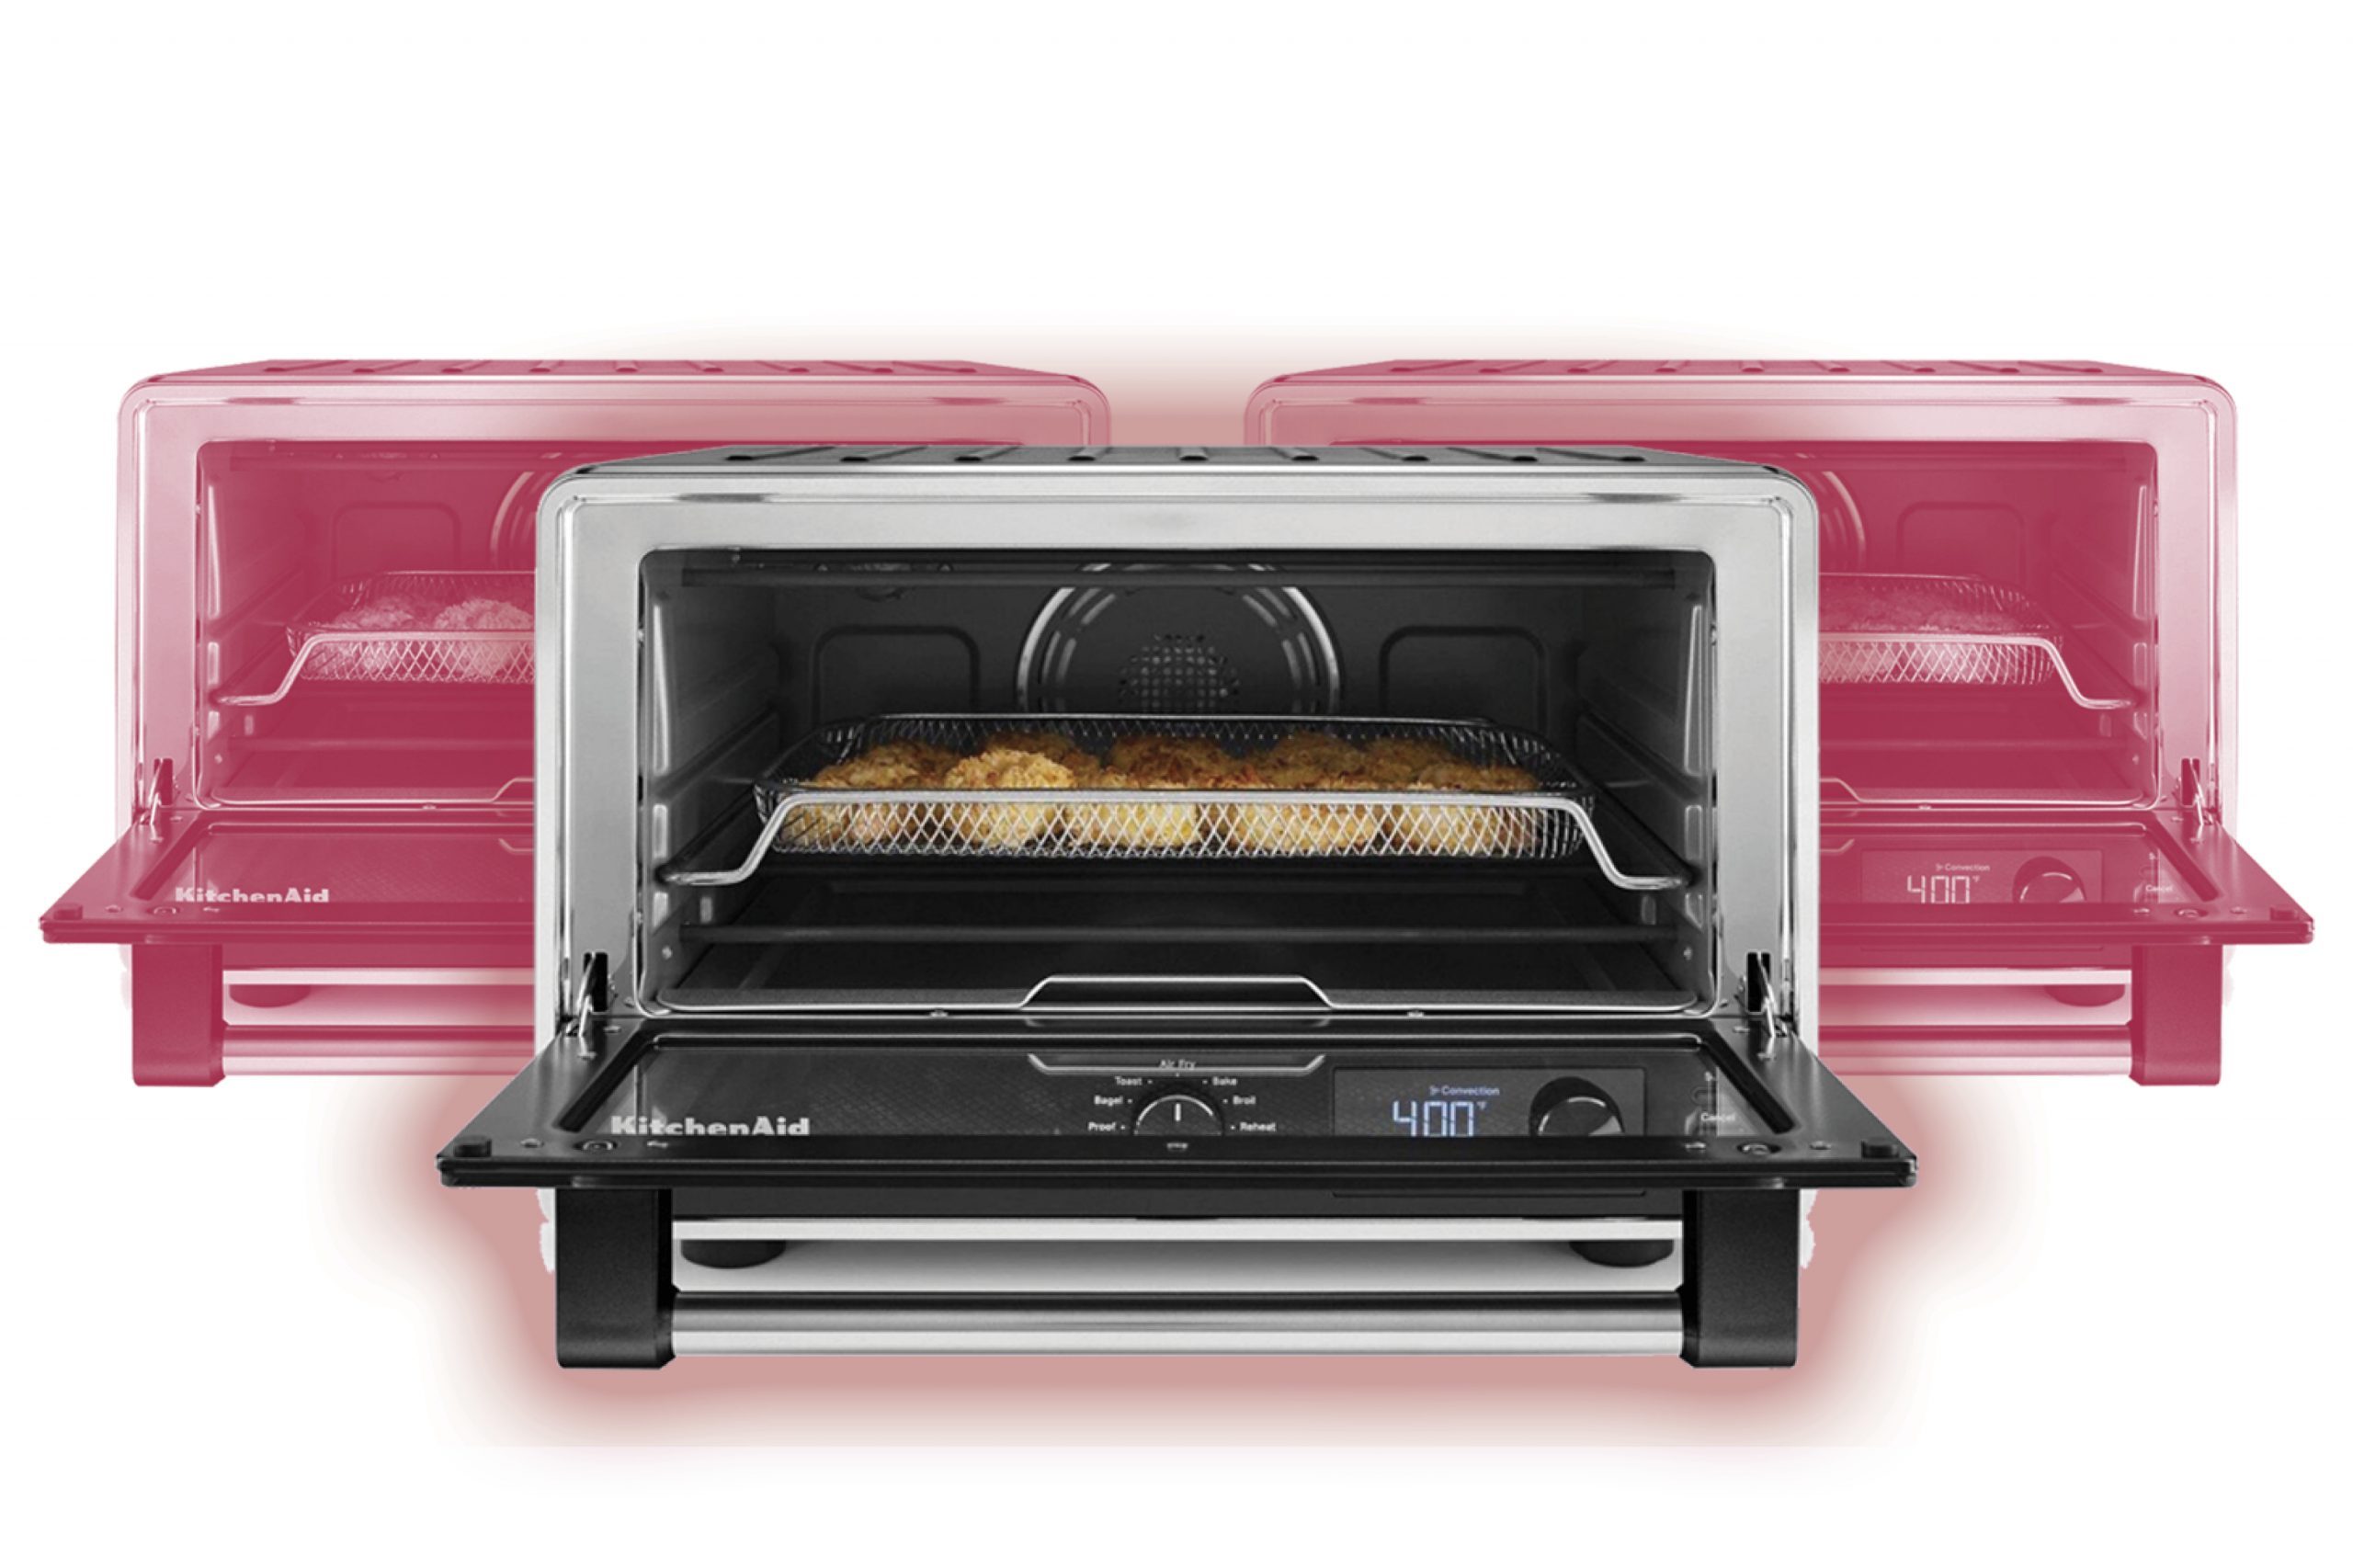 The Best Countertop Convection Oven Brands for Your Kitchen